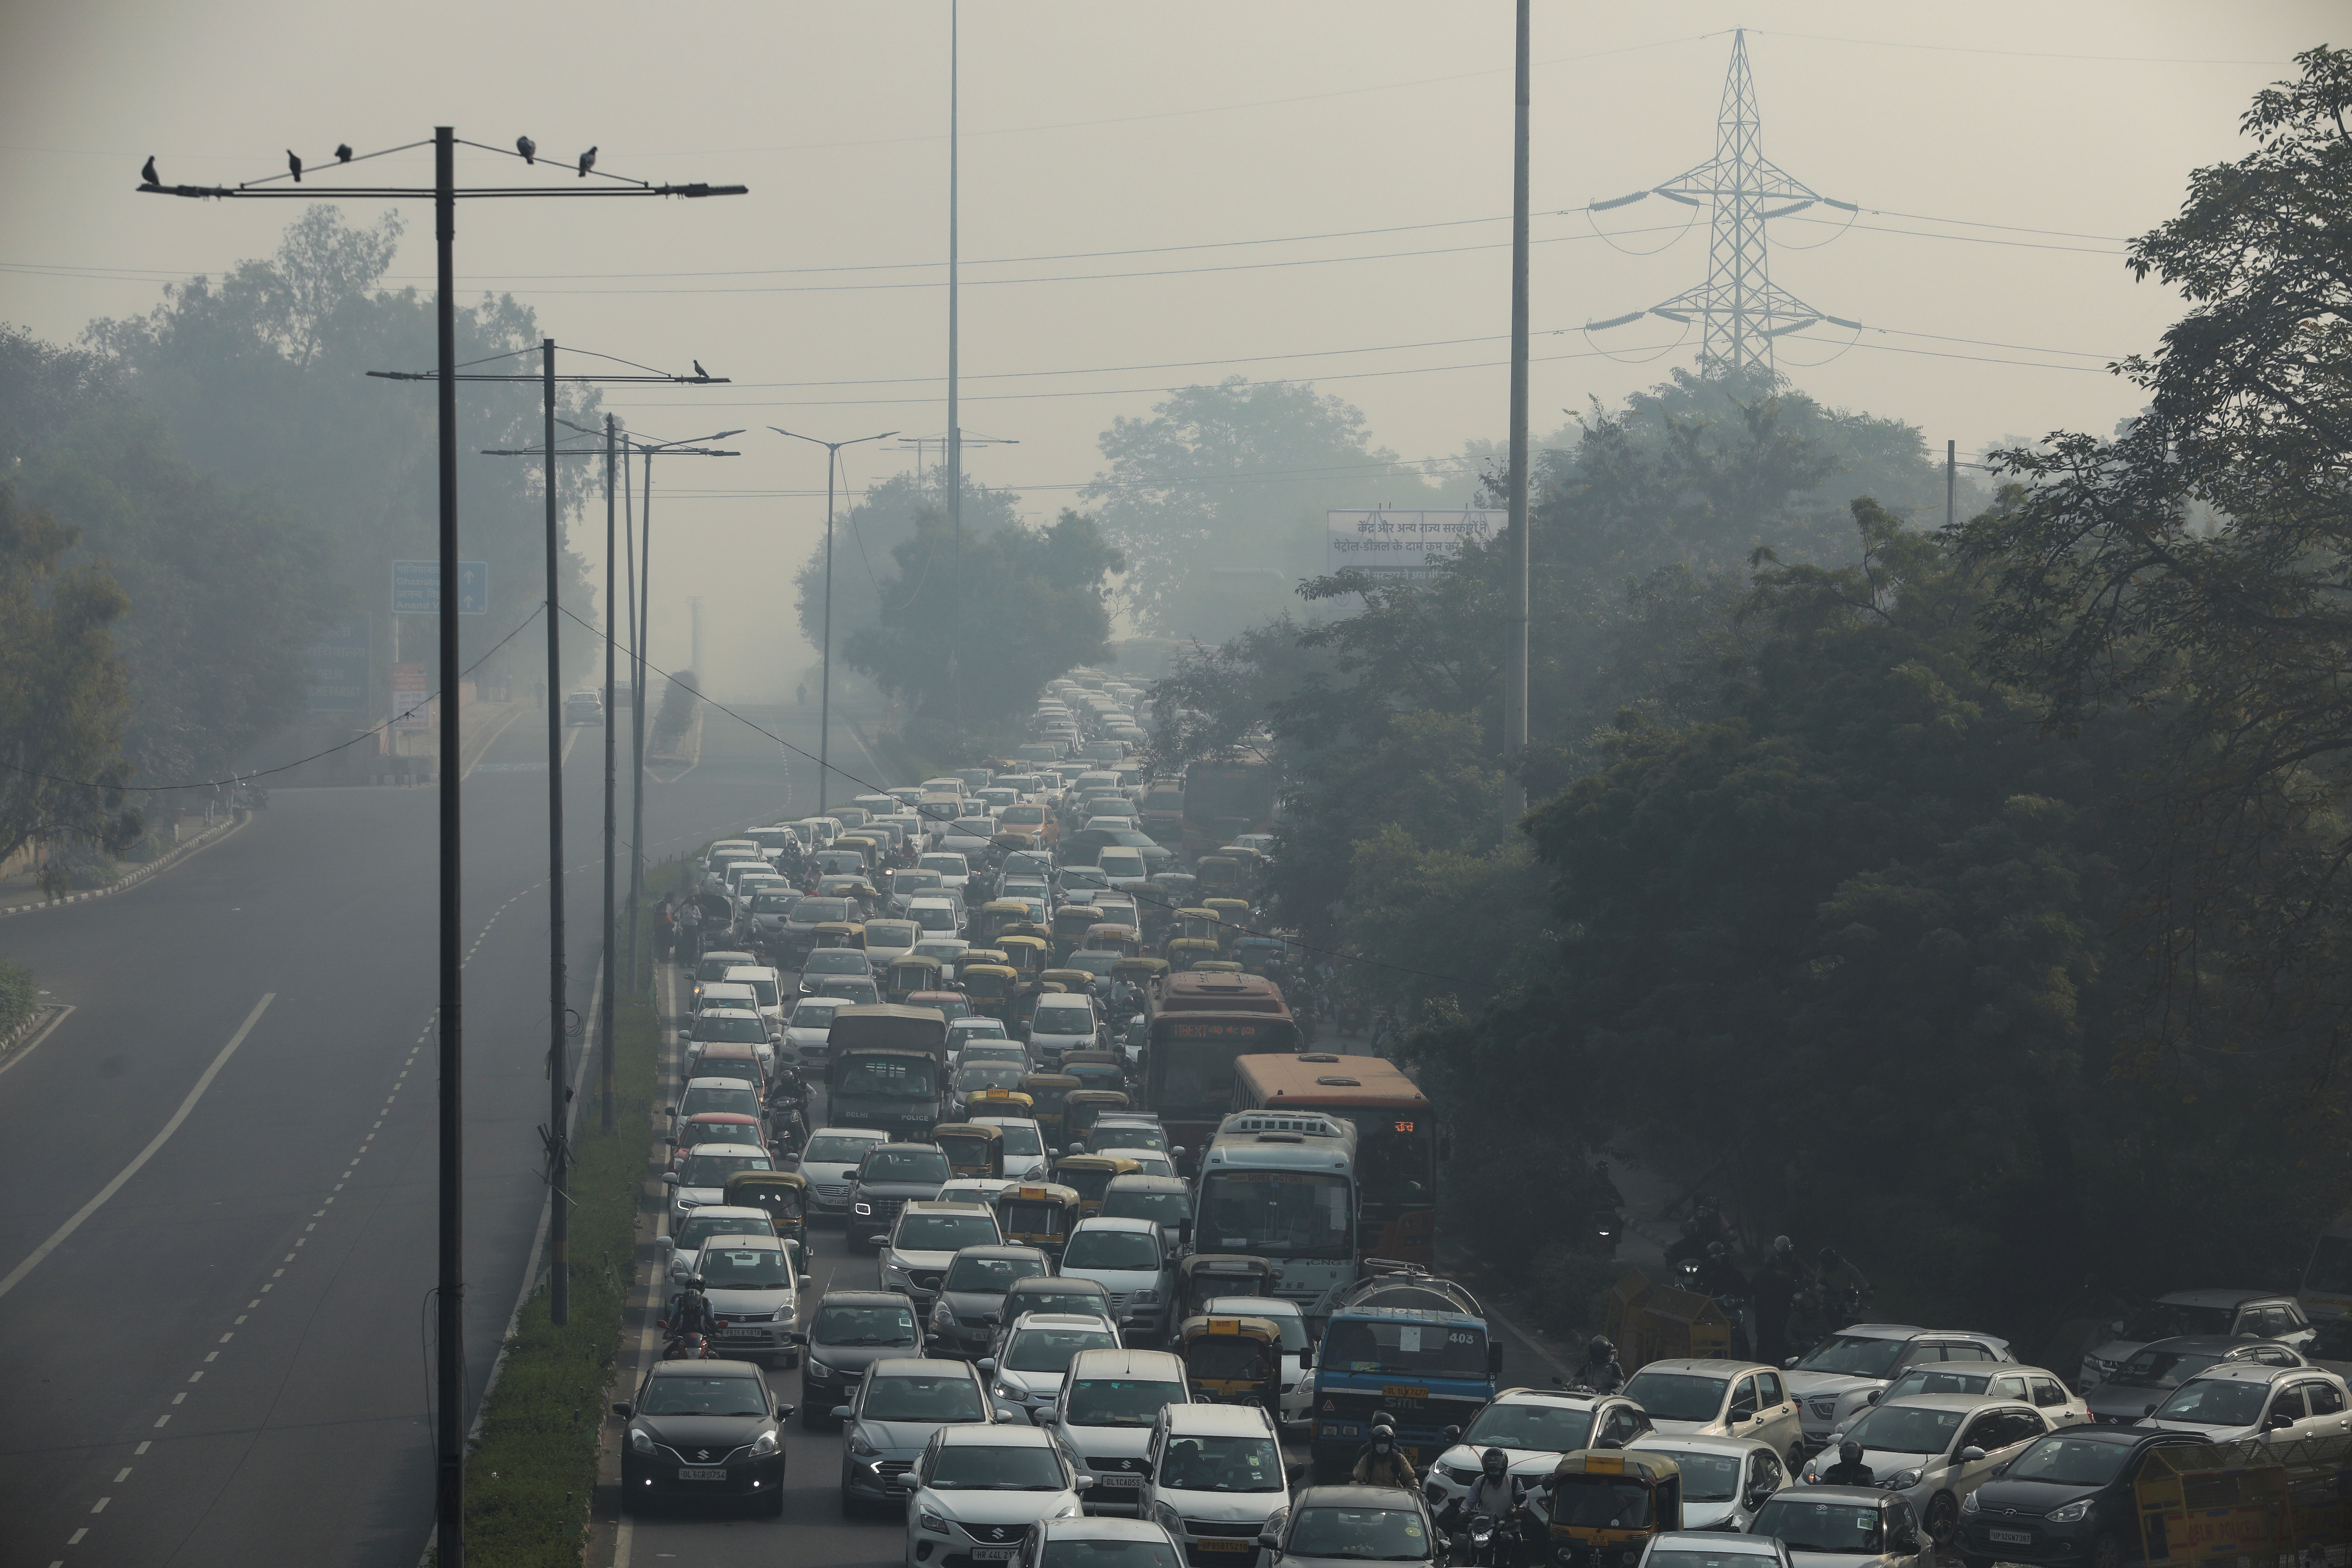 Vehicles are seen shrouded in smog in New Delhi, India